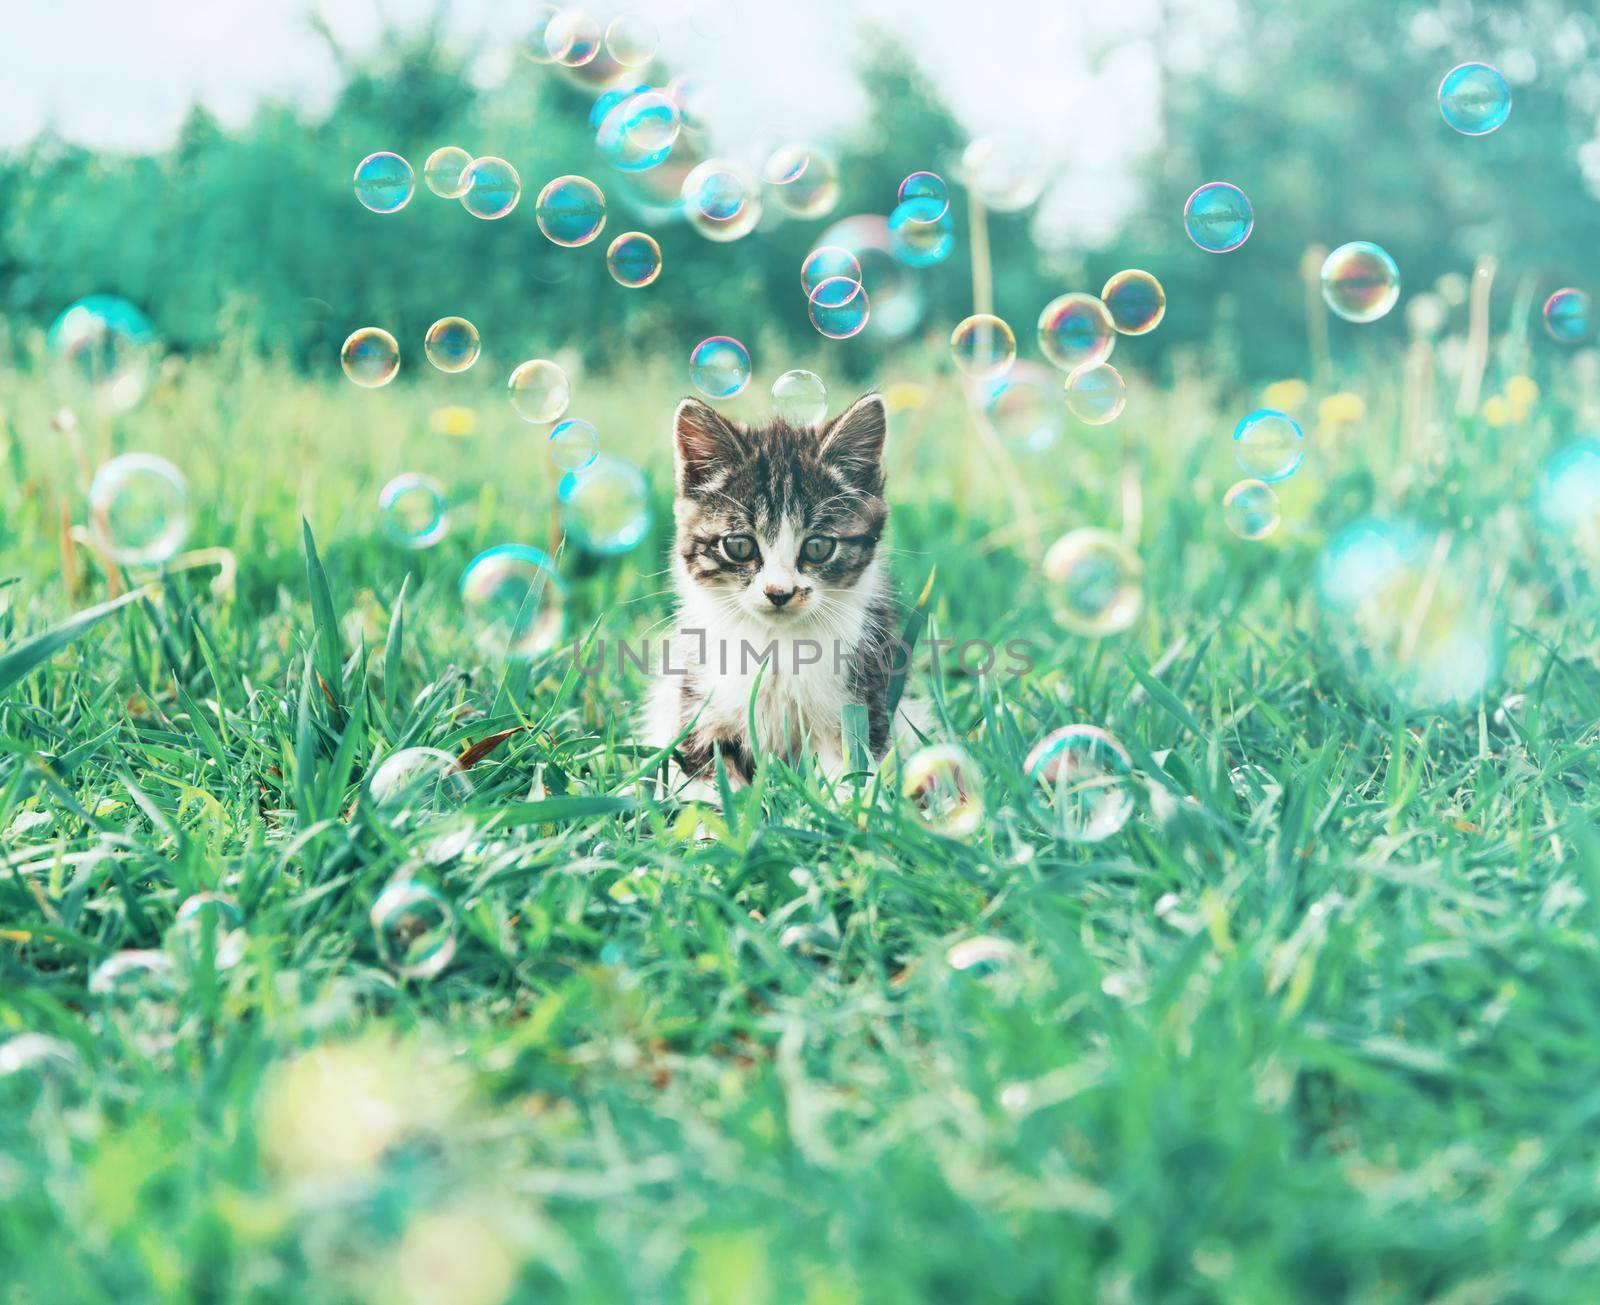 Little kitten sitting among soap bubbles on summer meadow. Image with vintage instagram filter